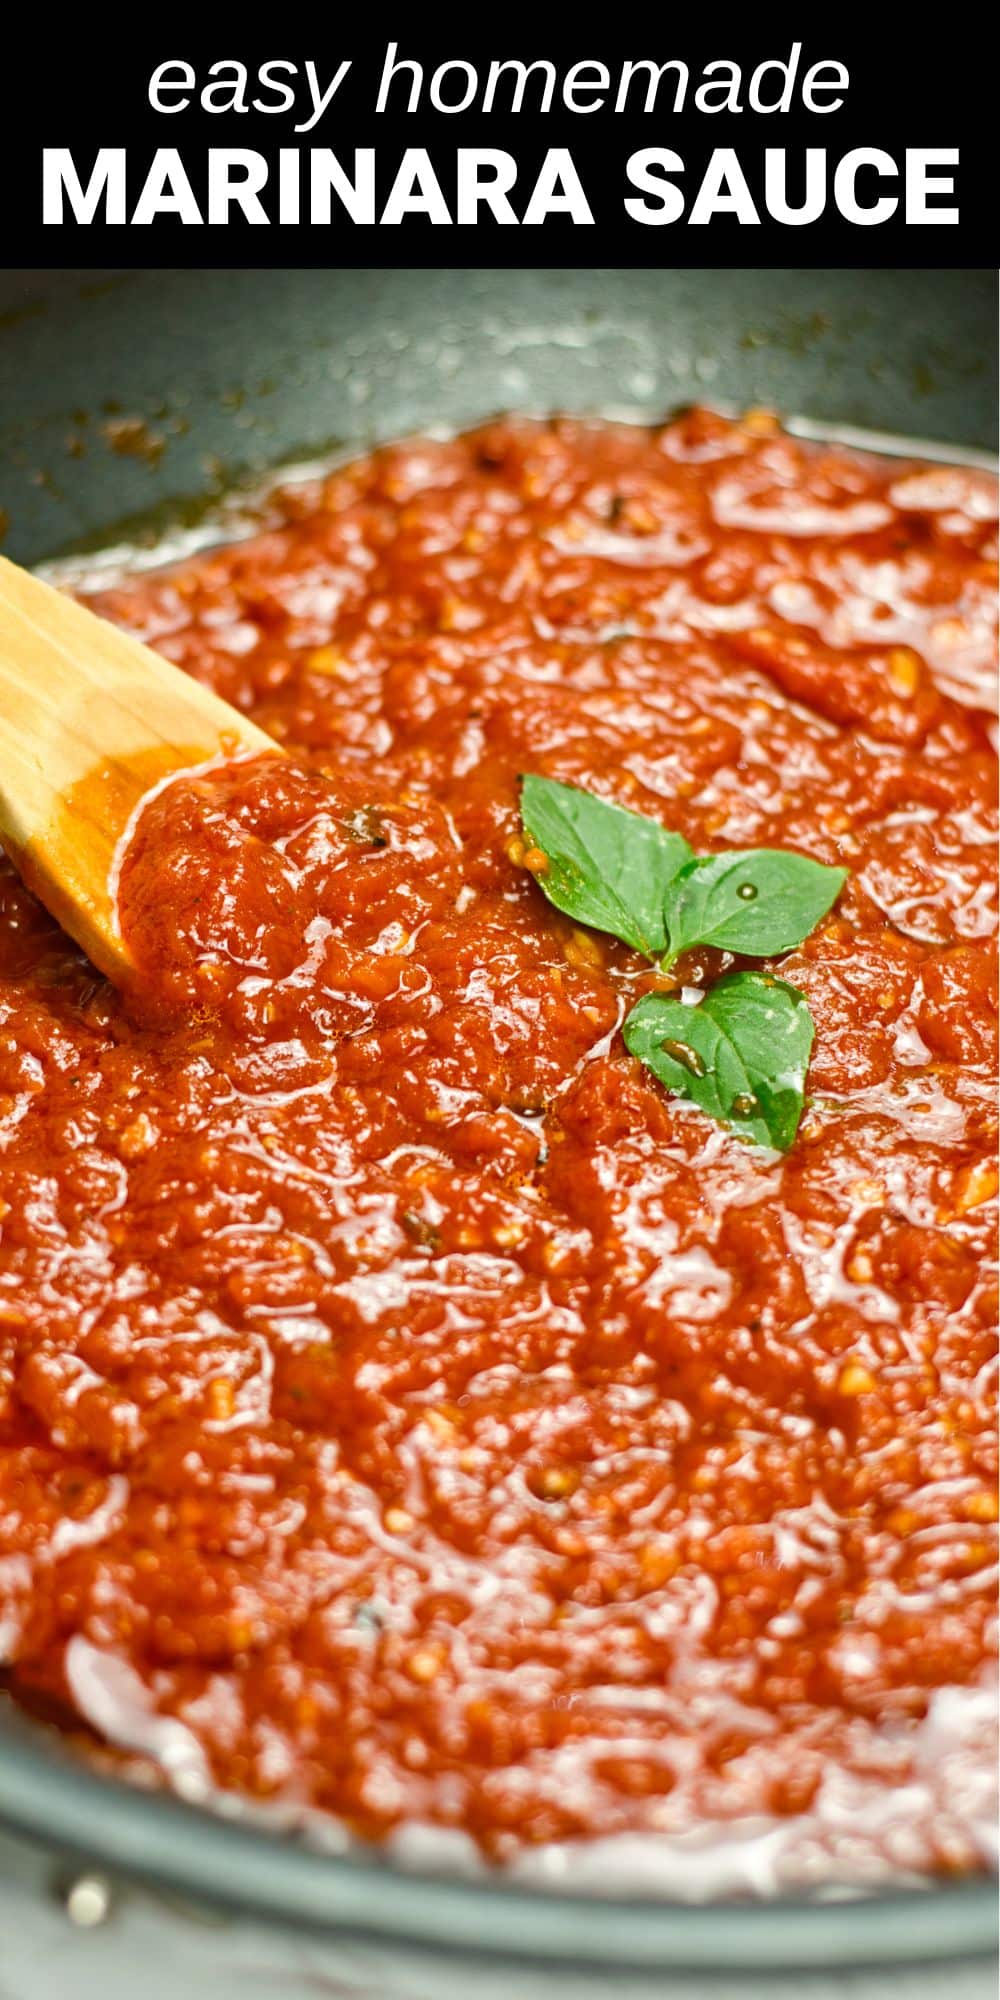 This made from scratch Italian Marinara Sauce recipe has a beautiful balance of flavor with sweet tomatoes, earthy Italian herbs and the perfect touch of heat from red pepper flakes. It's a deliciously savory dipping sauce or can be used as a base for many of your favorite Italian dishes.